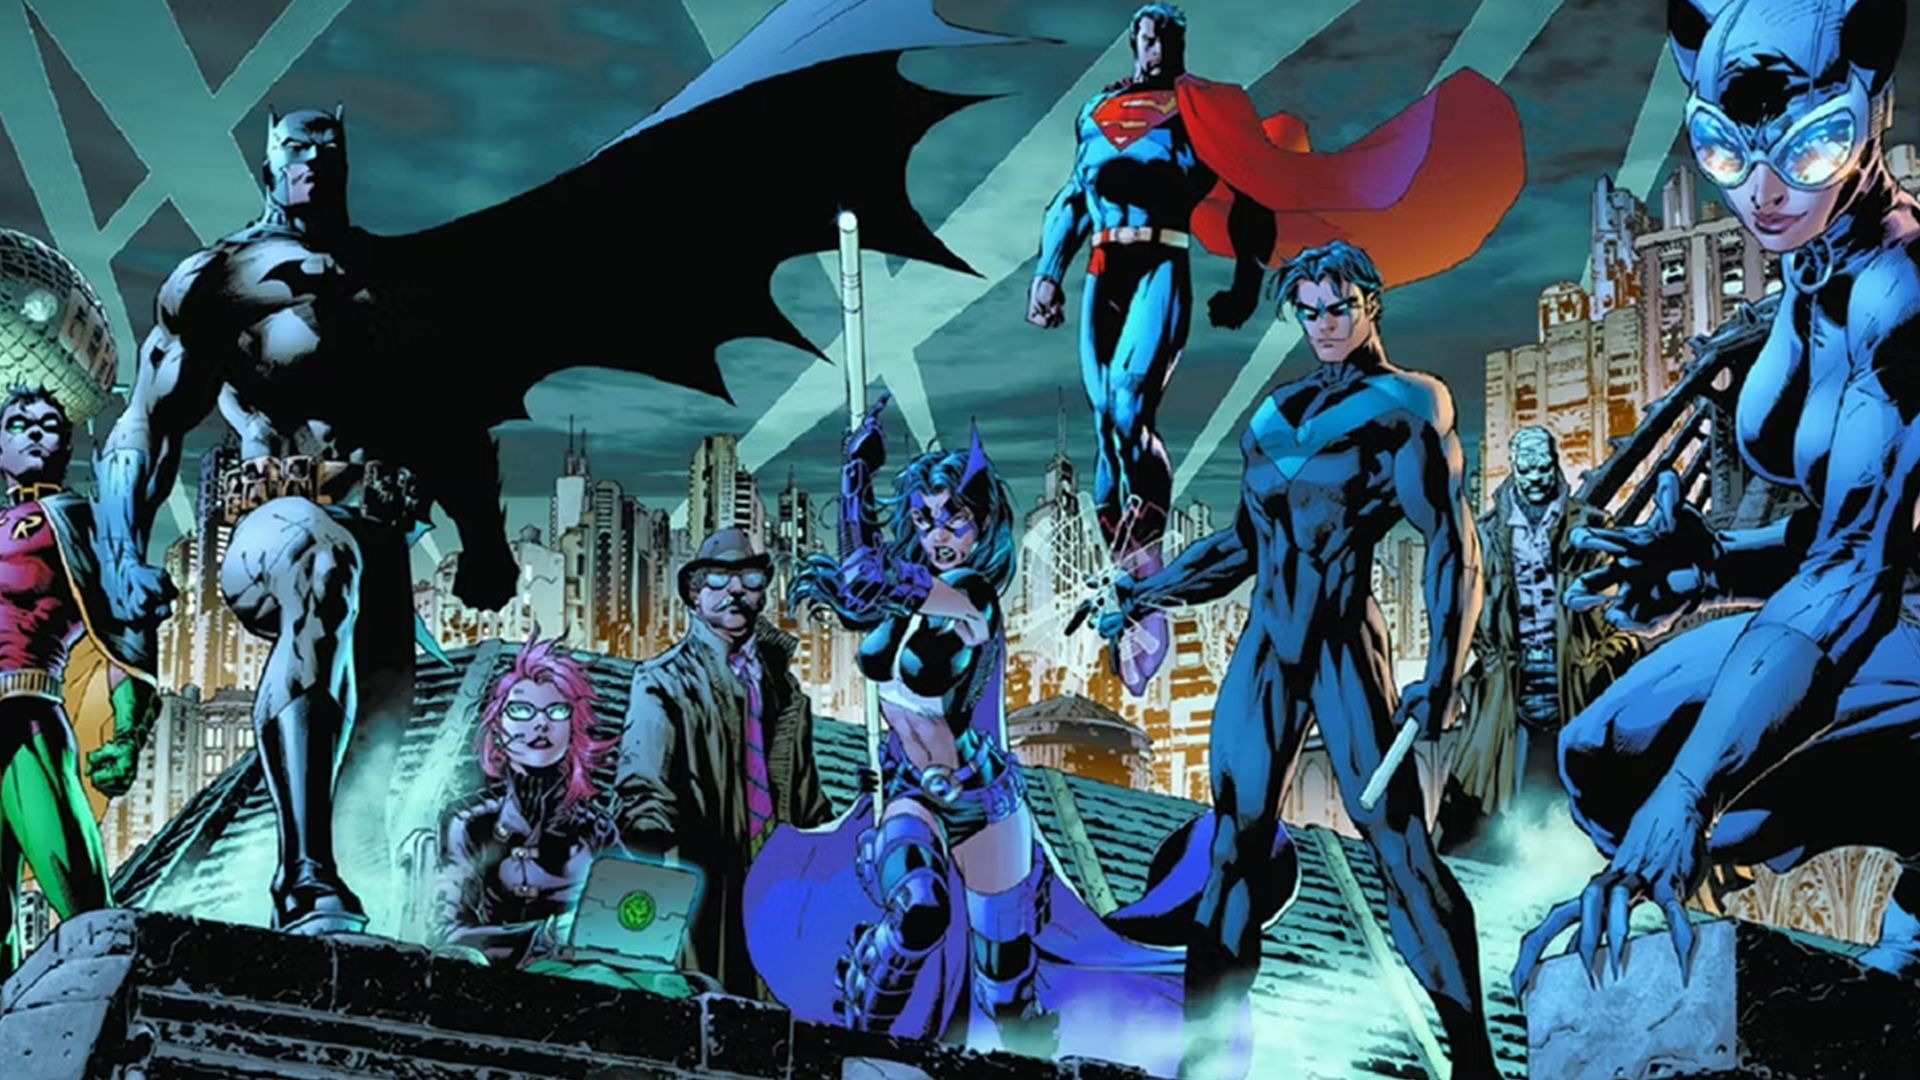 A comic panel of Batman, Superman, Nightwing, and their allies from DC Comics